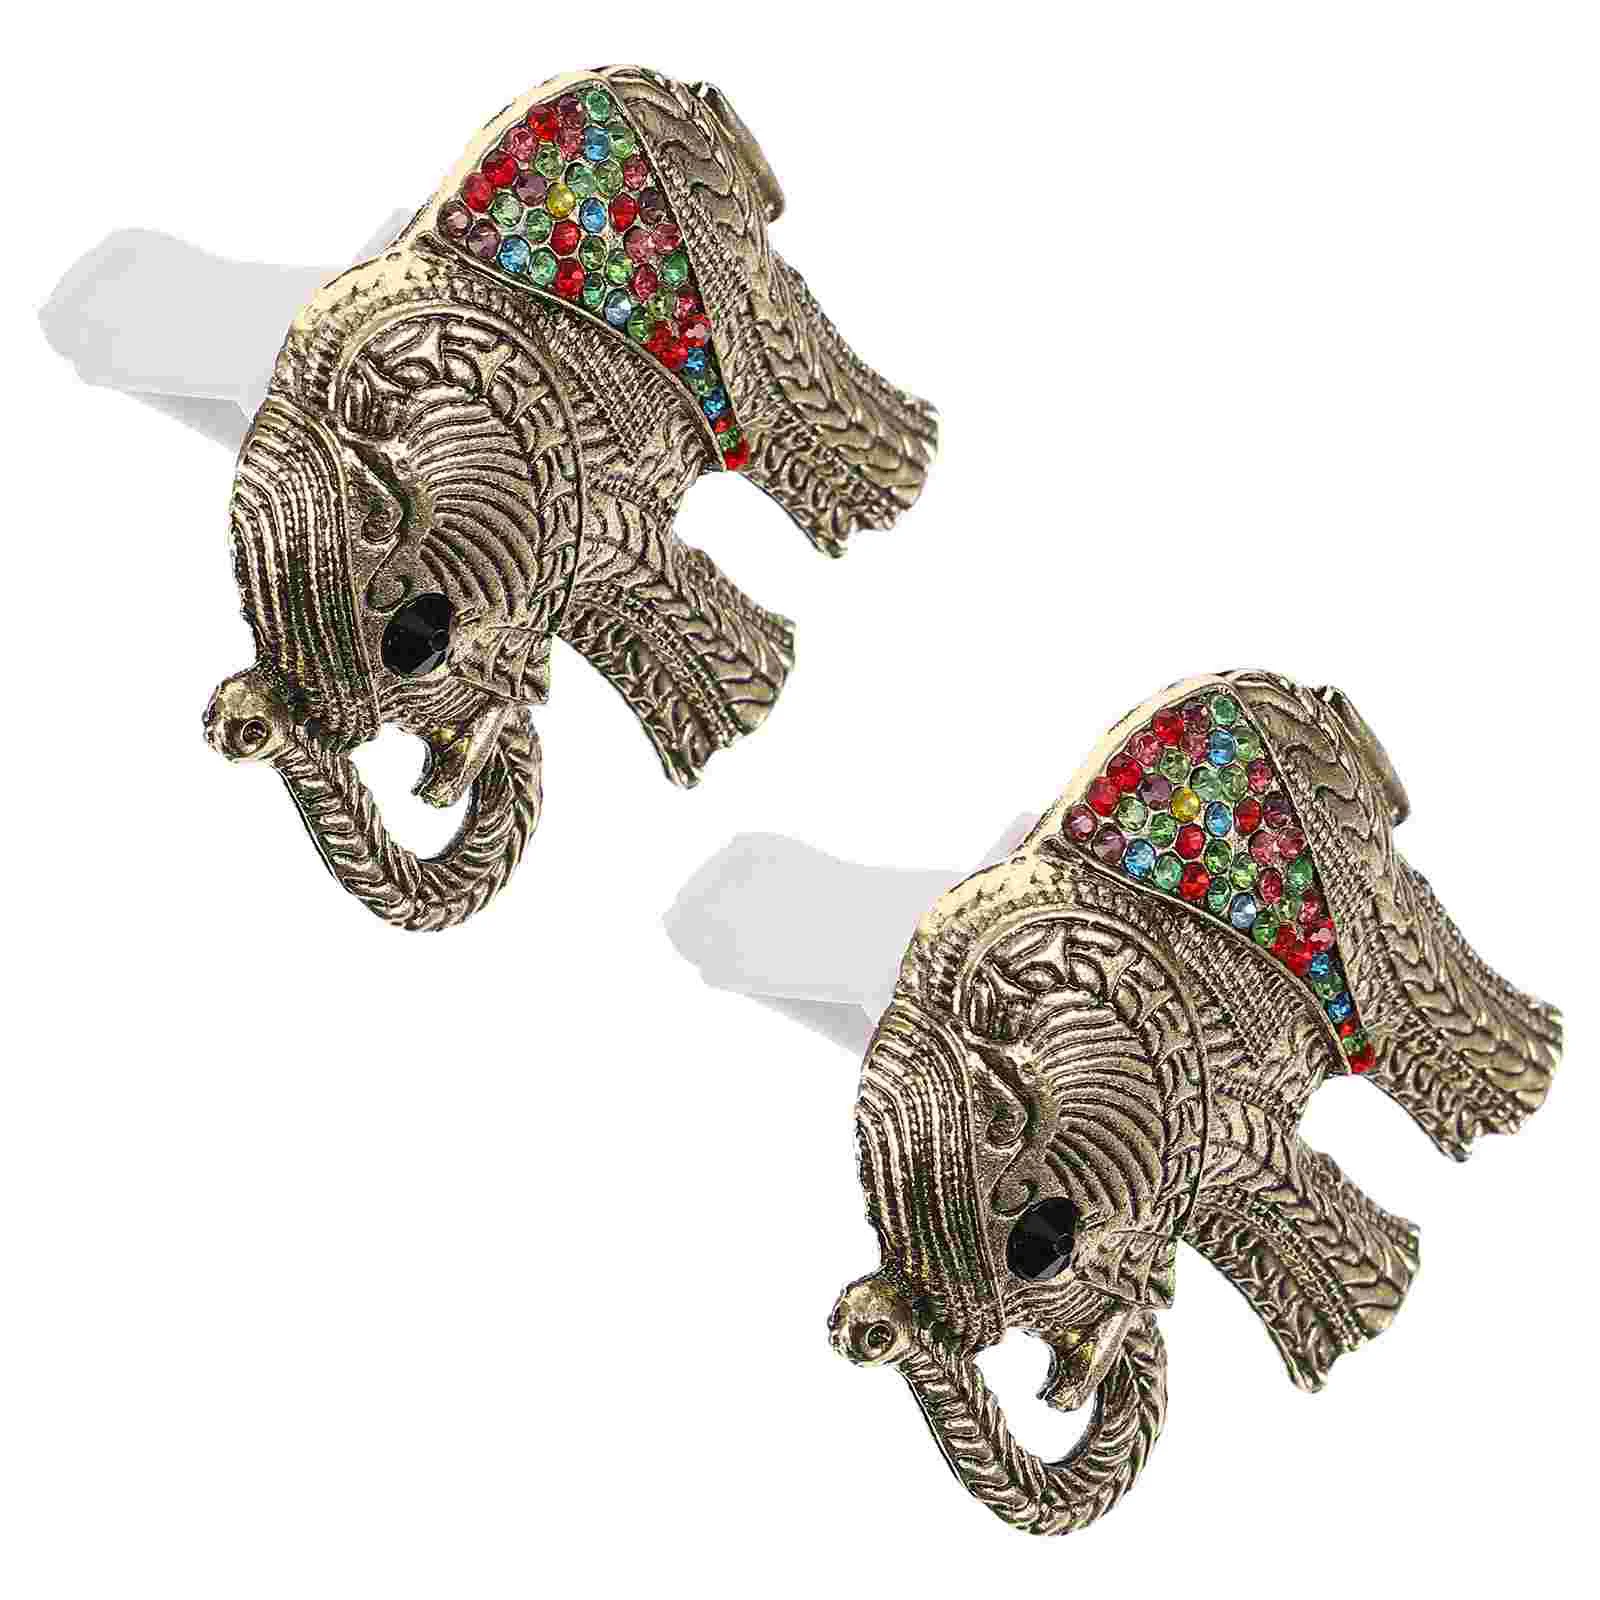 

2 Pcs Air Outlet Perfume Clip Aroma Diffuser Car Vents Odor Freshener Fresheners Bling Decor Elephant Accessories for woman